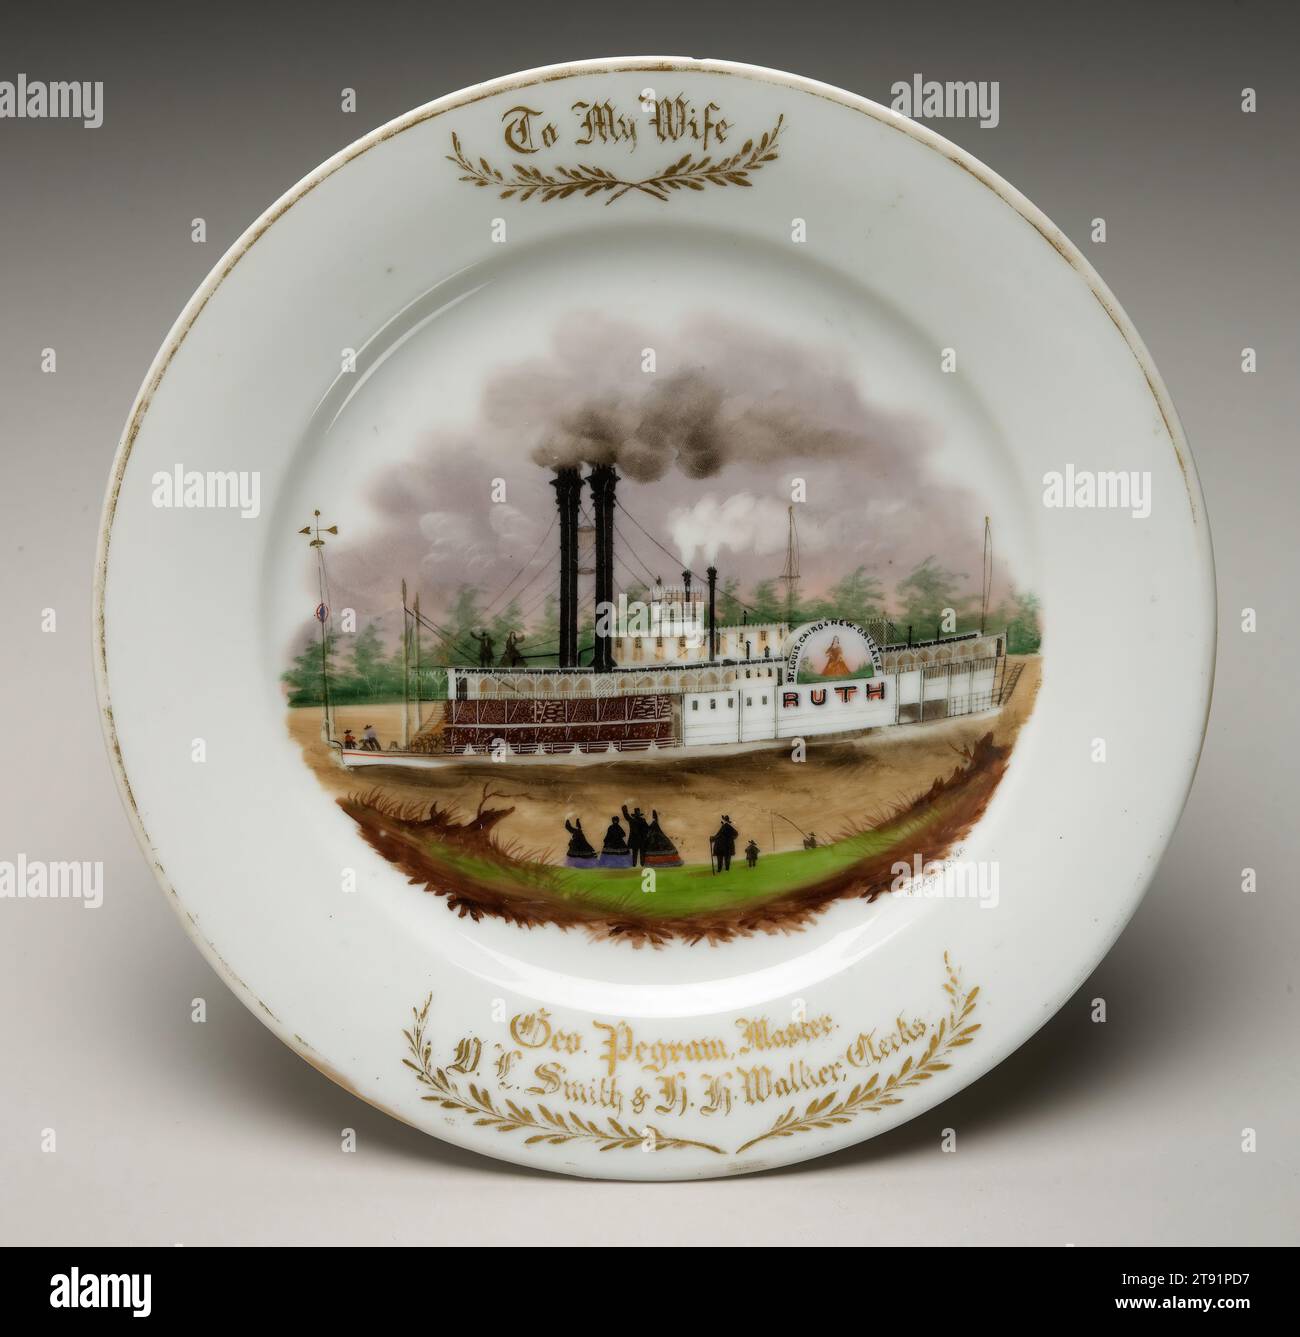 Plate, 1865, Rudolph T. Lux, American (Germany), American (born Germany), c. 1815-1868, 1 1/4 x 9 1/2 x 9 1/2 in. (3.18 x 24.13 x 24.13 cm), Porcelain, United States, 19th century, Since its heyday in the nineteenth century, the steamboat has symbolized the Mississippi River's role as a conduit for commerce, design, and pleasure Stock Photo